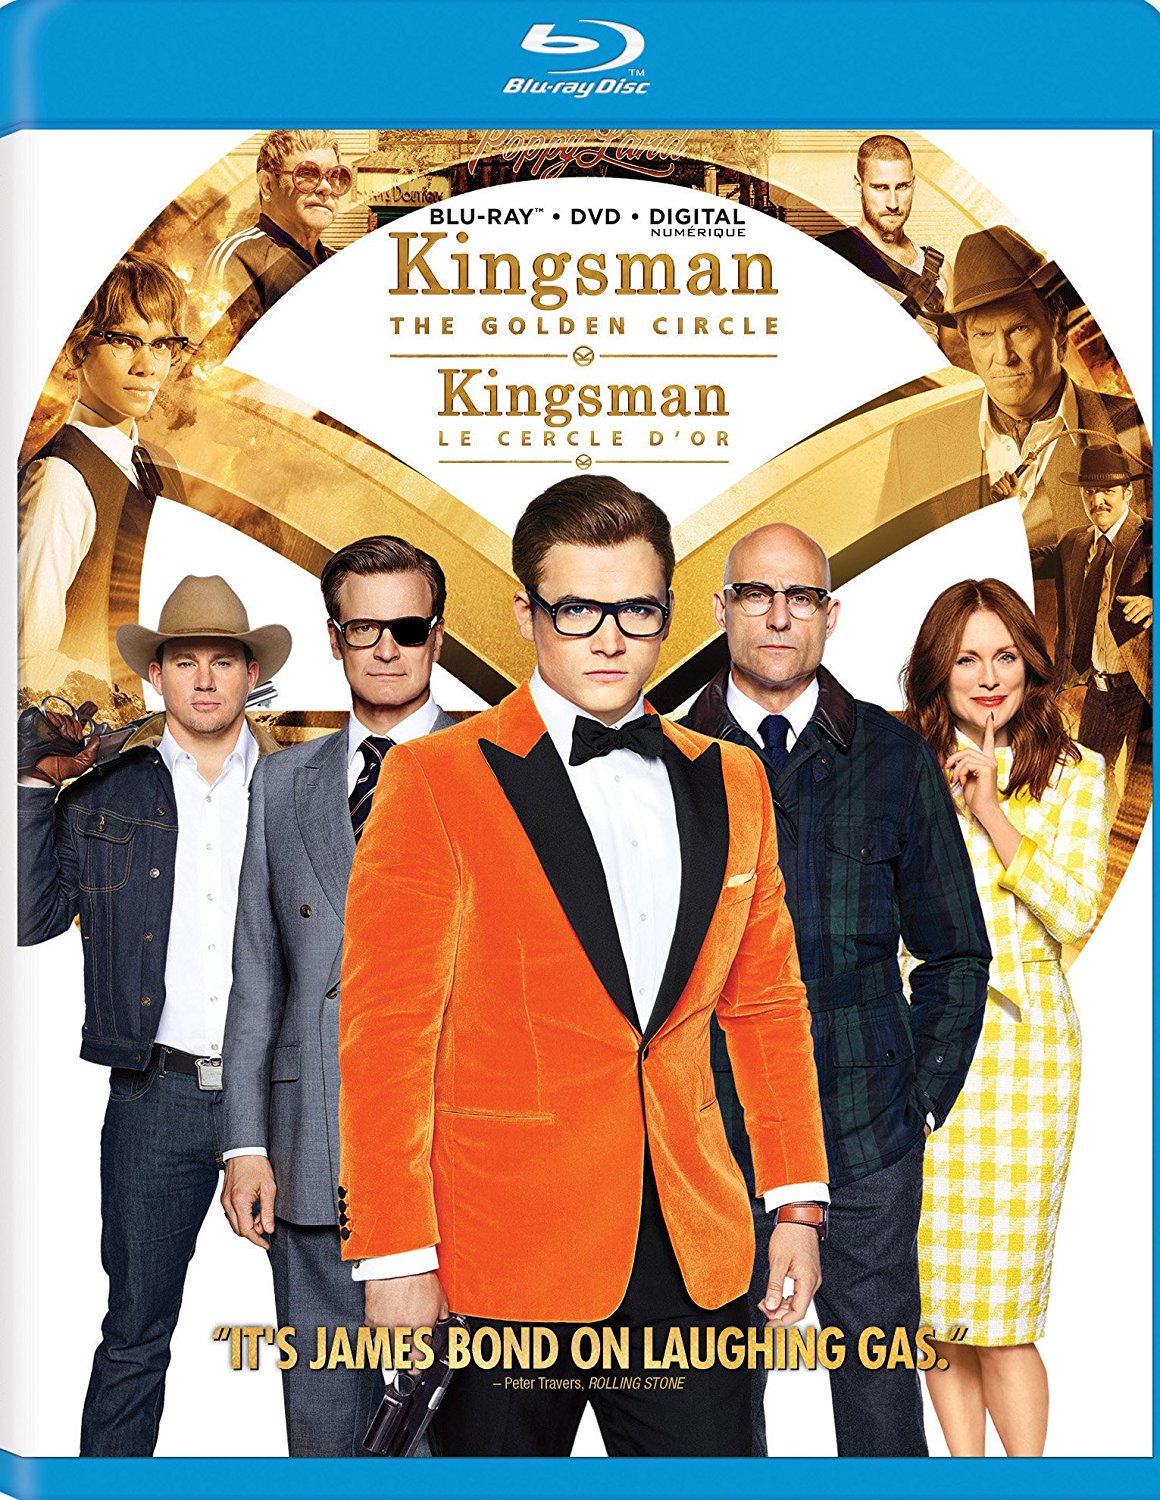 Kingsman The Golden Circle : BR only.